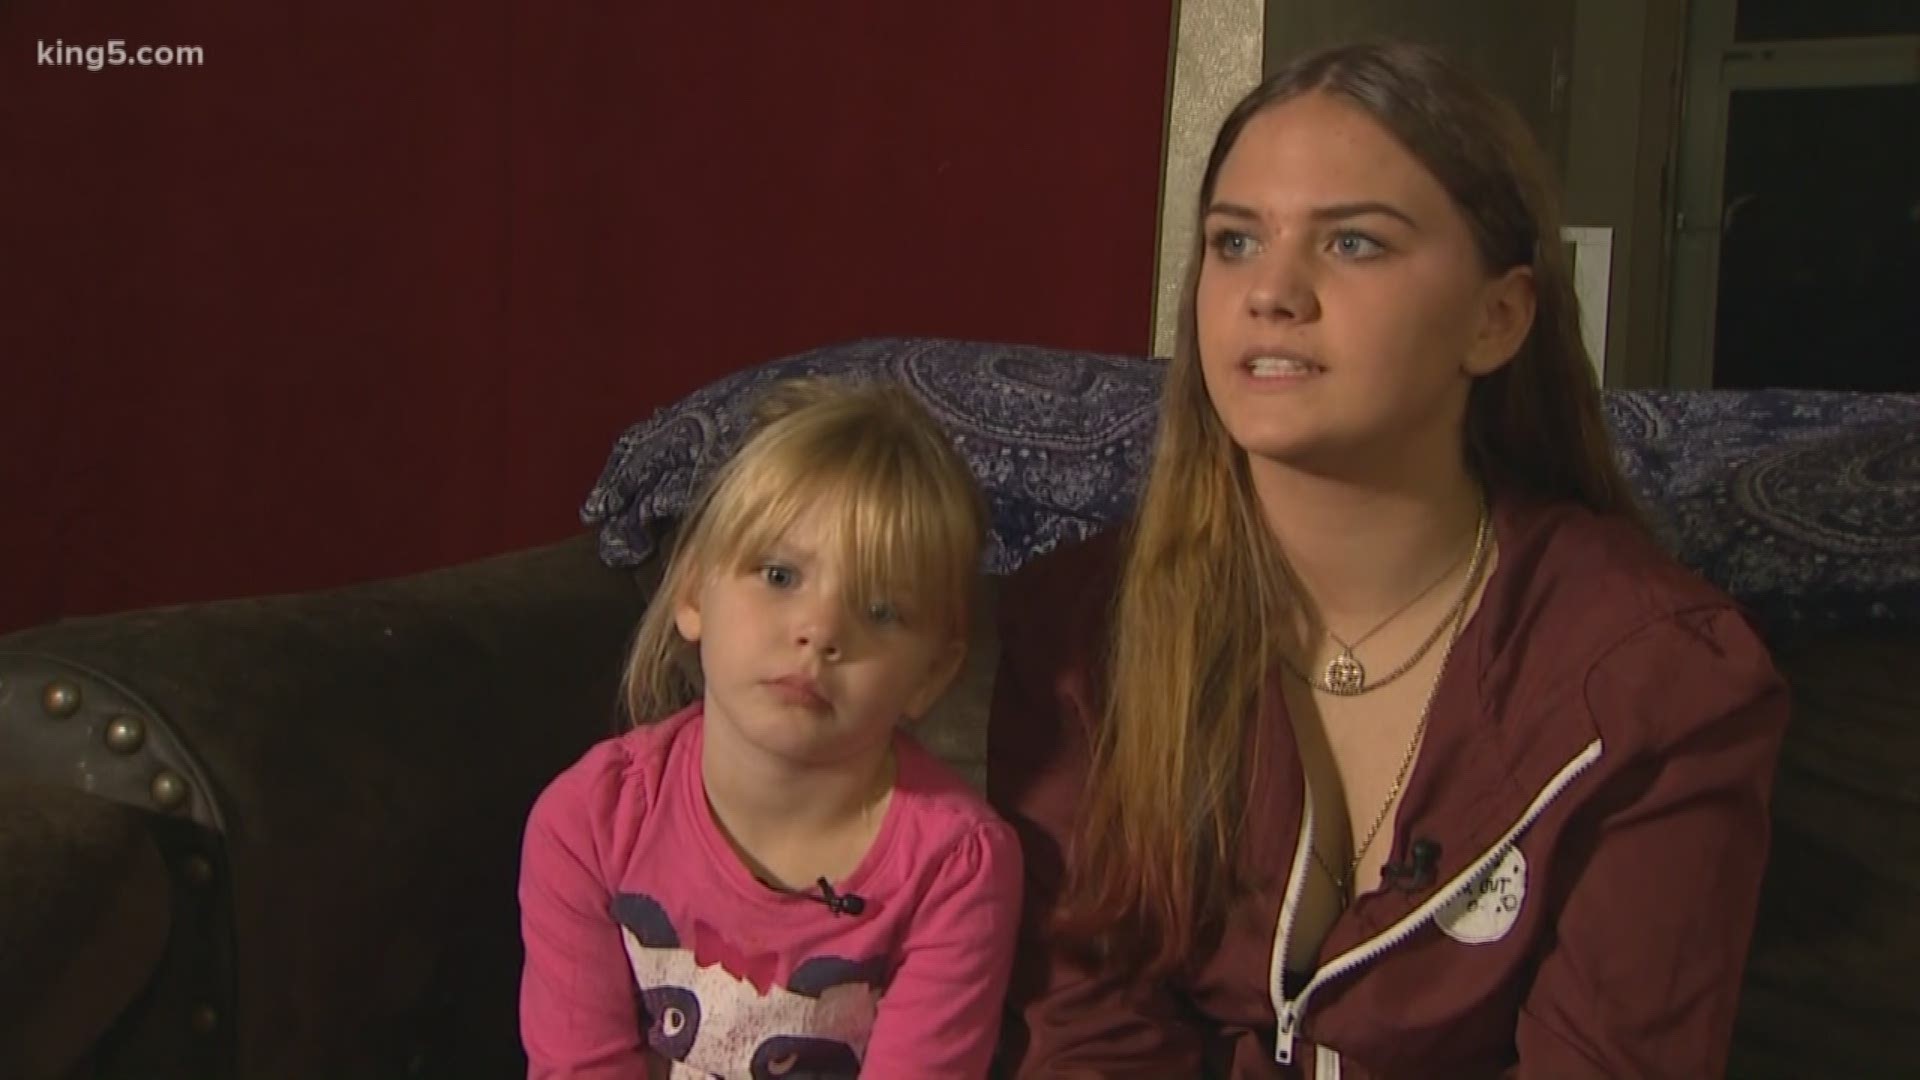 A 16-year-old and her 4-year-old sister were approached by a man in a ski mask.